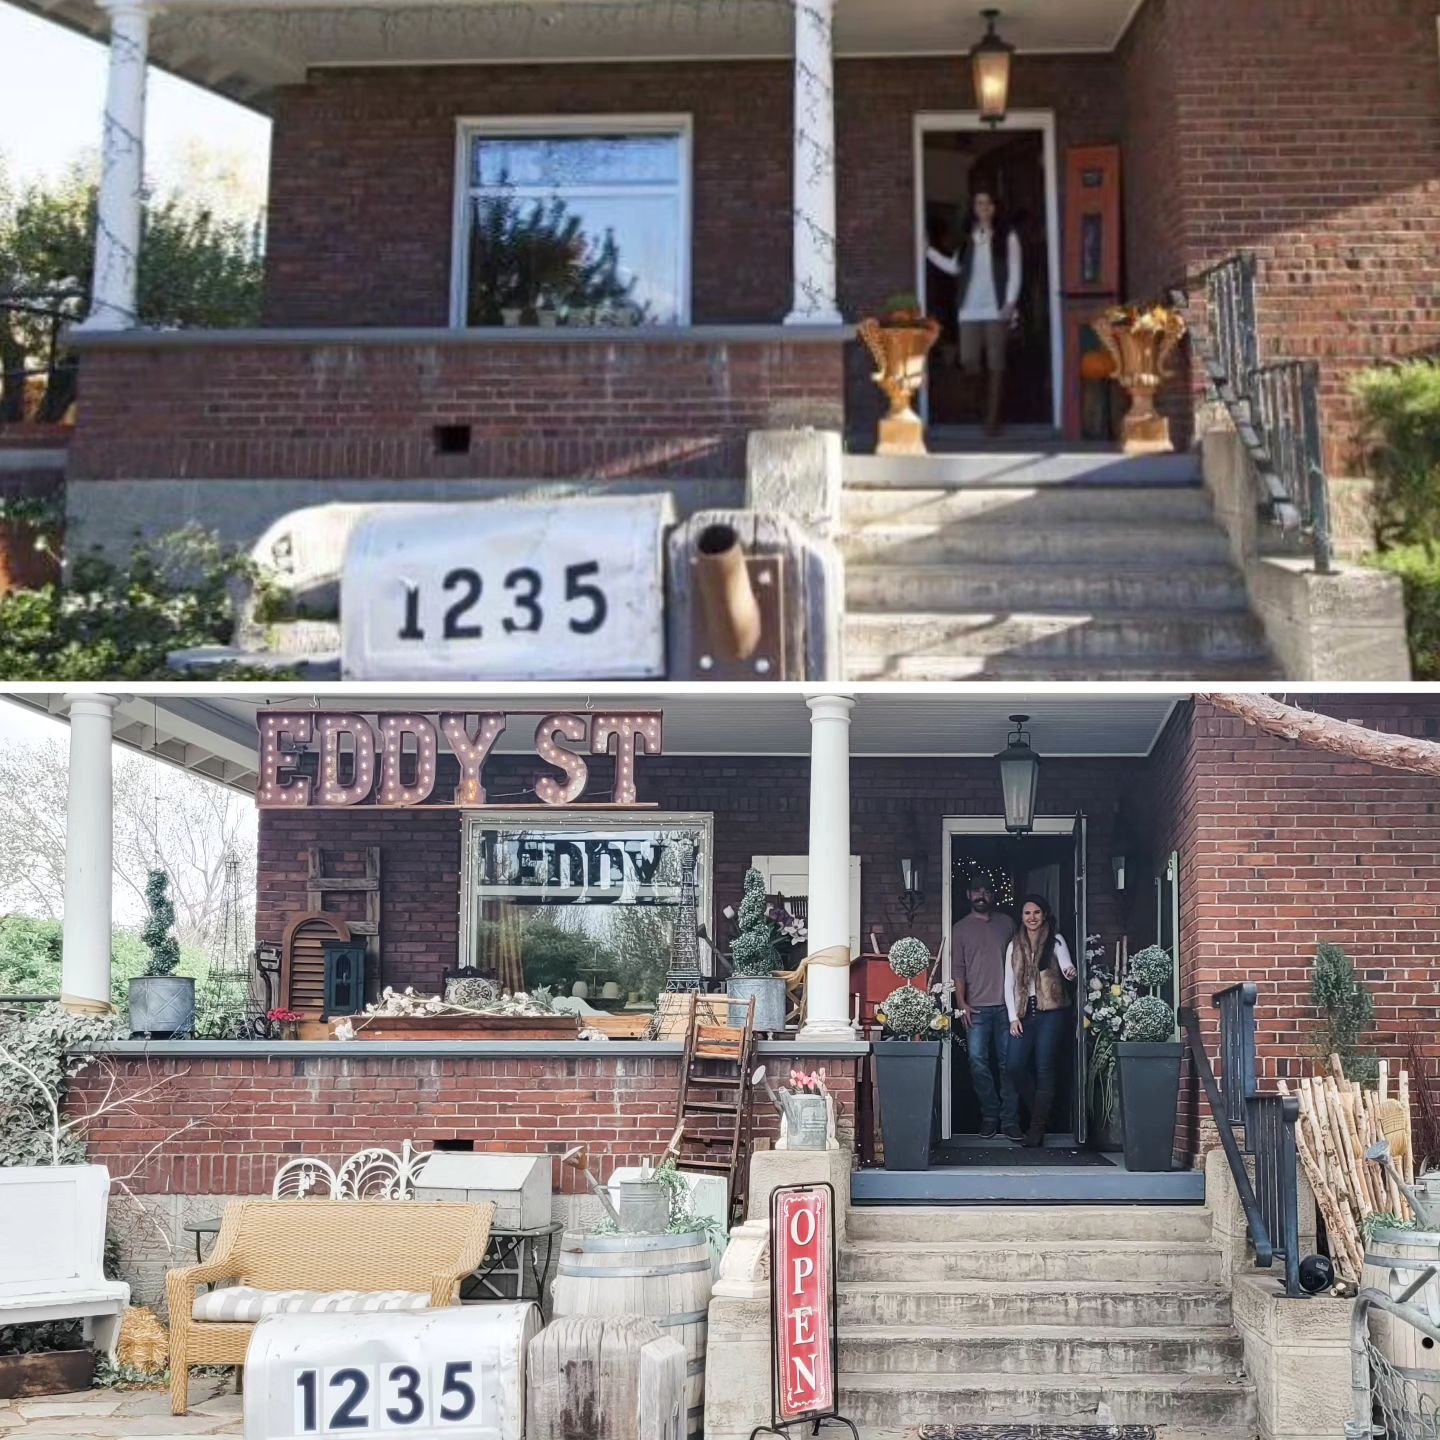 You could say things have changed a little bit these past 10 years. And we are just so thankful ❤️ what has your favorite theme been?

#eddystreetvintagemarket #eddystreeterforlife #vintageinspired #popuptheme #popupshop #whycv